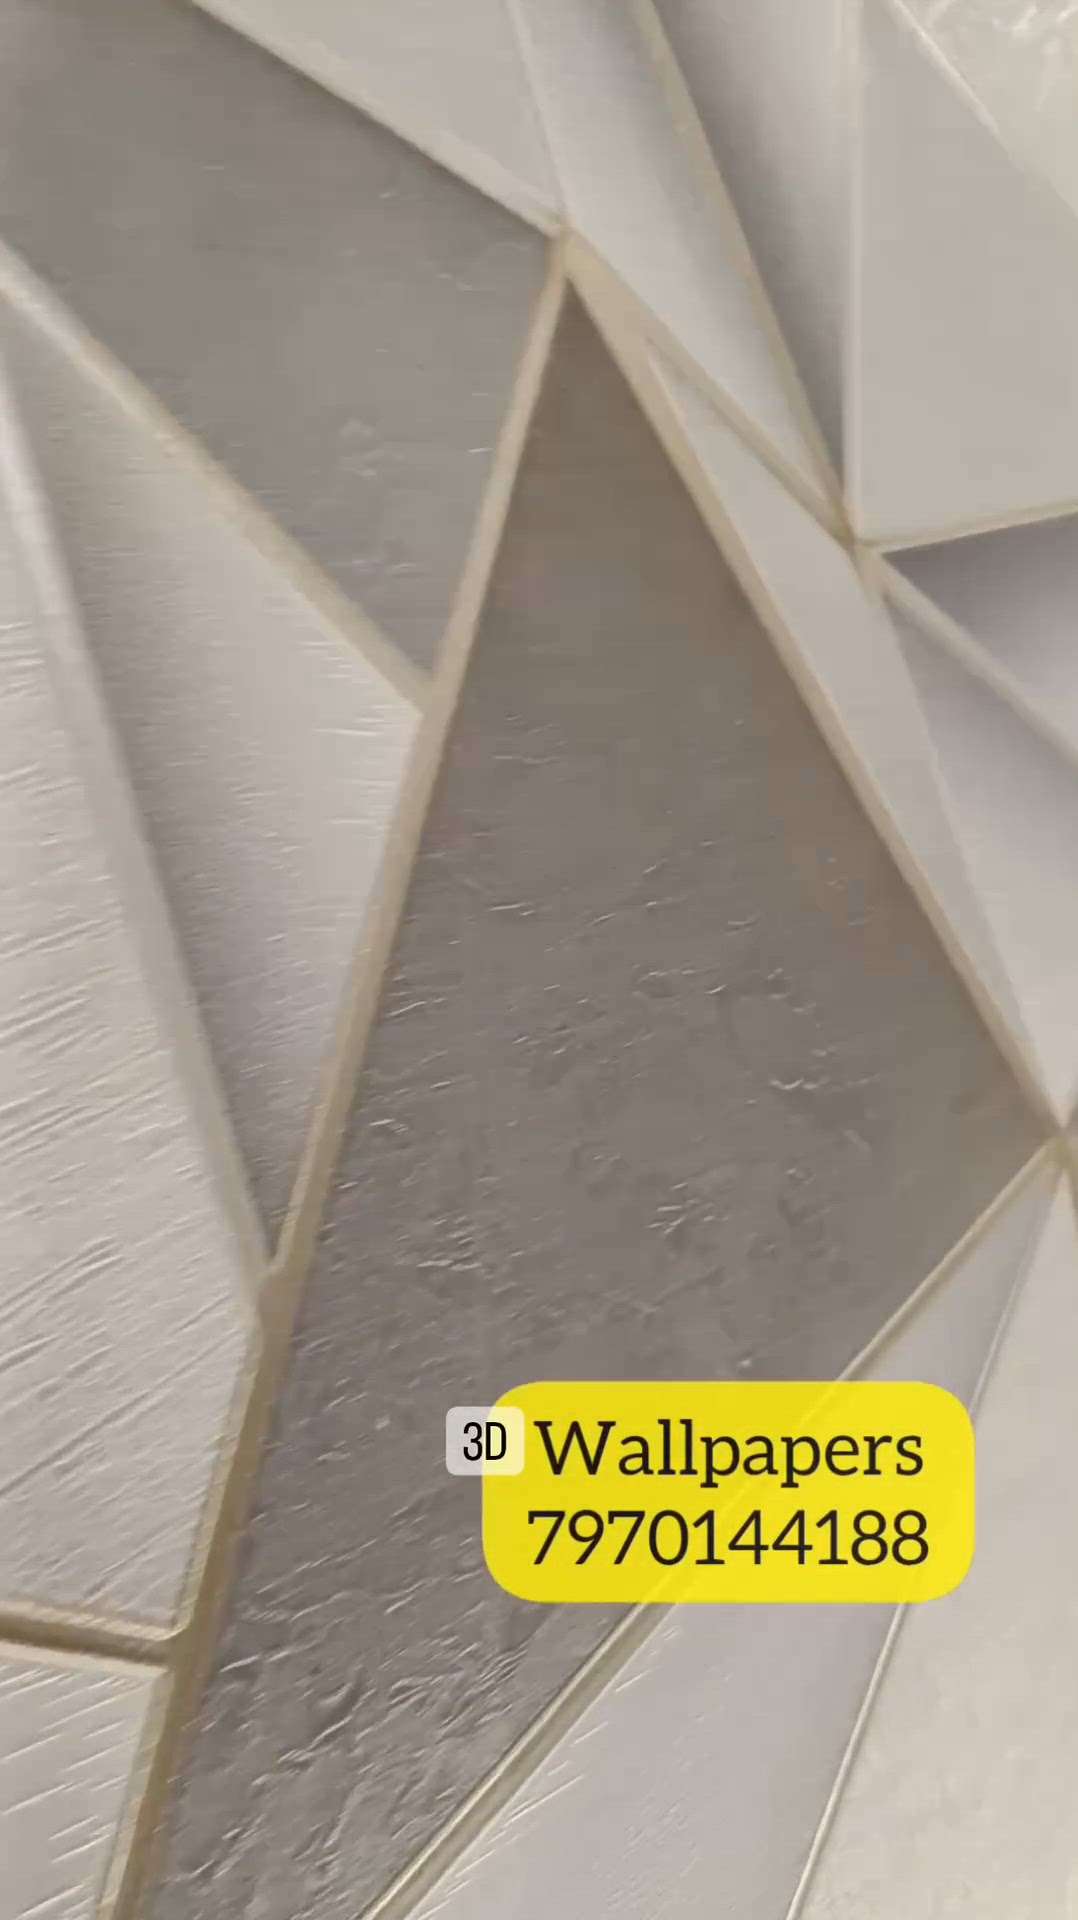 Wallpapers Available 7970144188 
#WALL_PAPER #wallpannel #customized_wallpaper #wallpaperrolles #wallpalerdesign